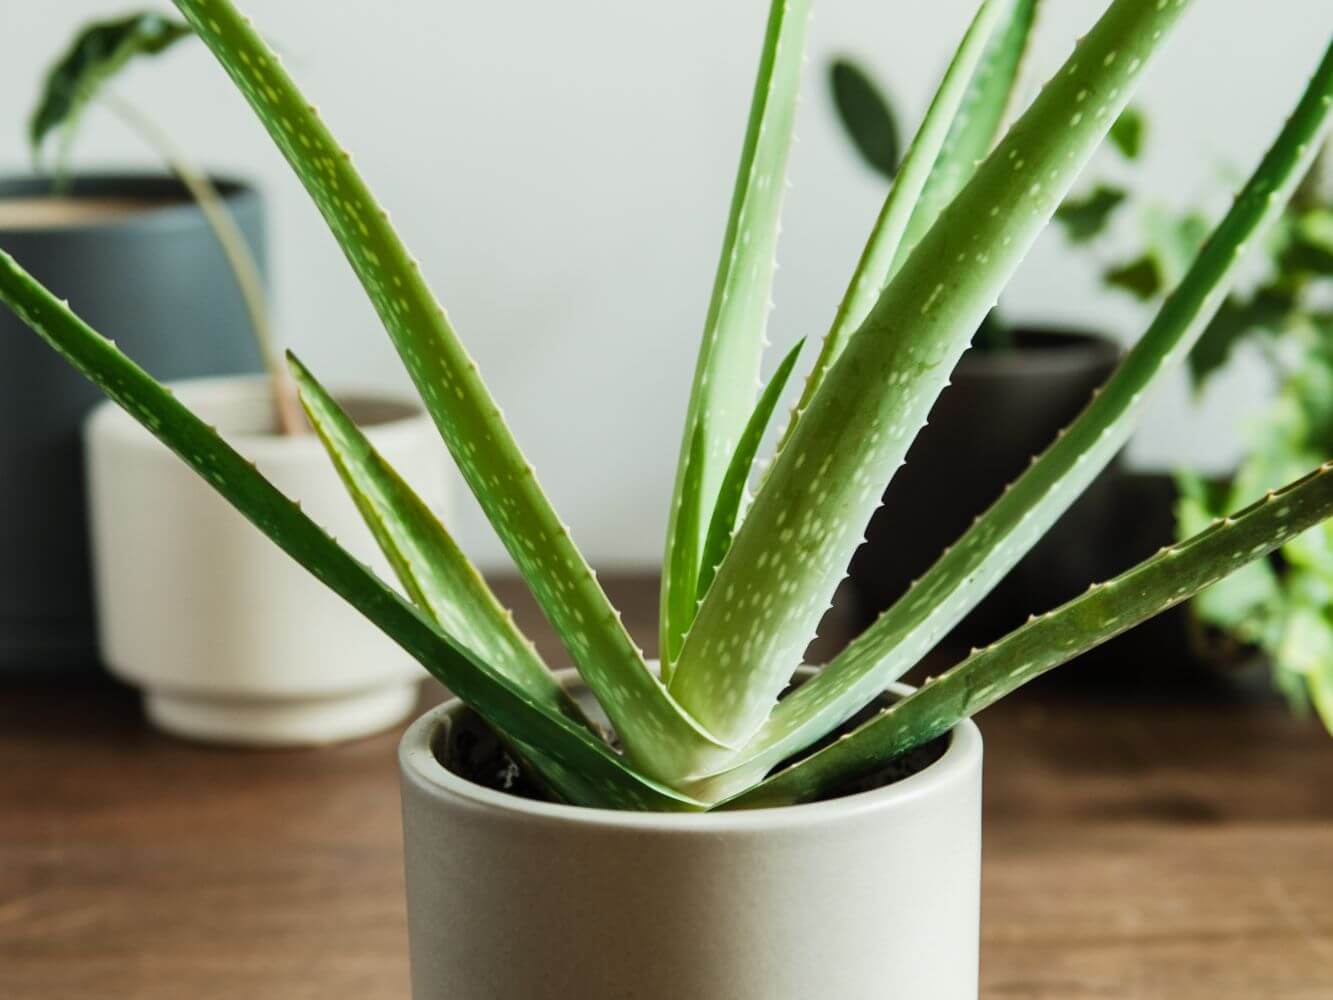 5 Benefits of Aloe Vera for Skin Health and preventing Aging